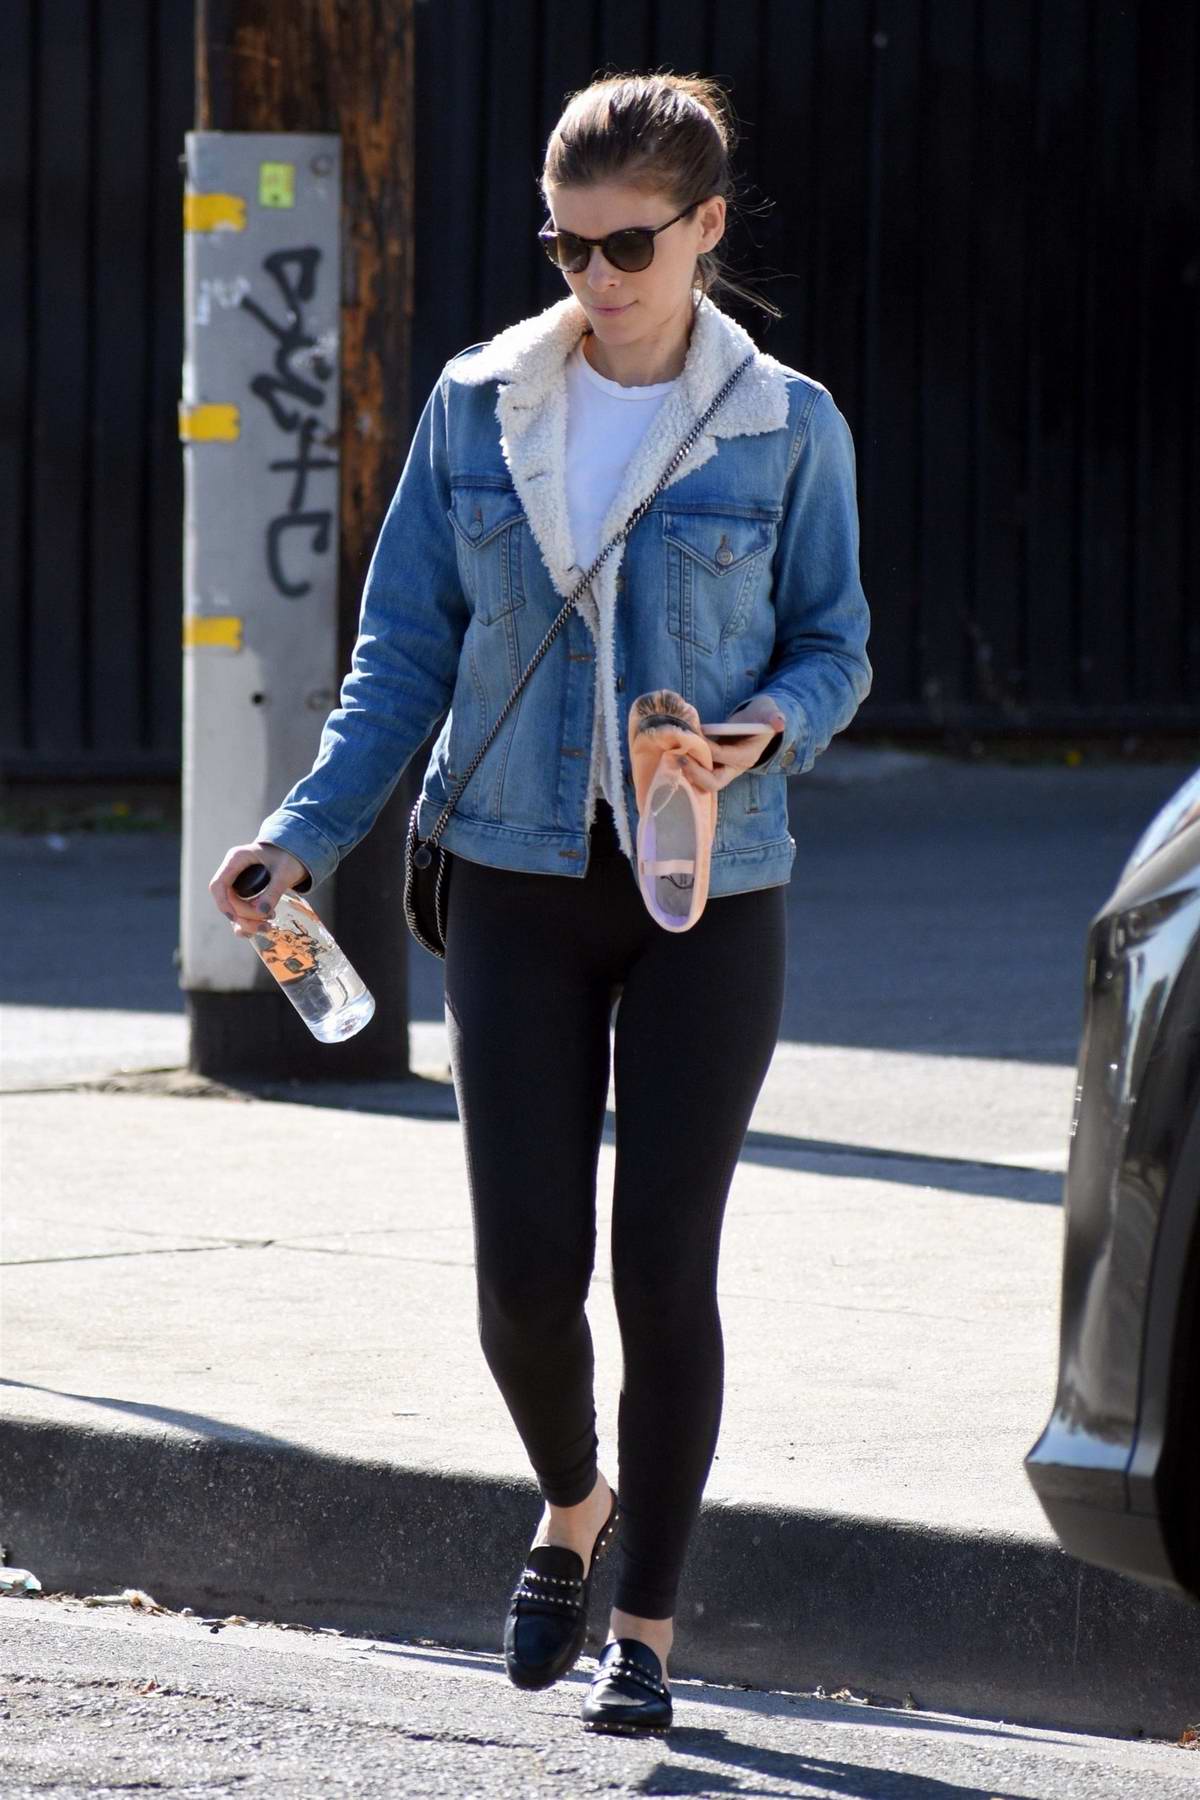 kate mara seen carrying her ballet sleepers as she leaves a ballet ...